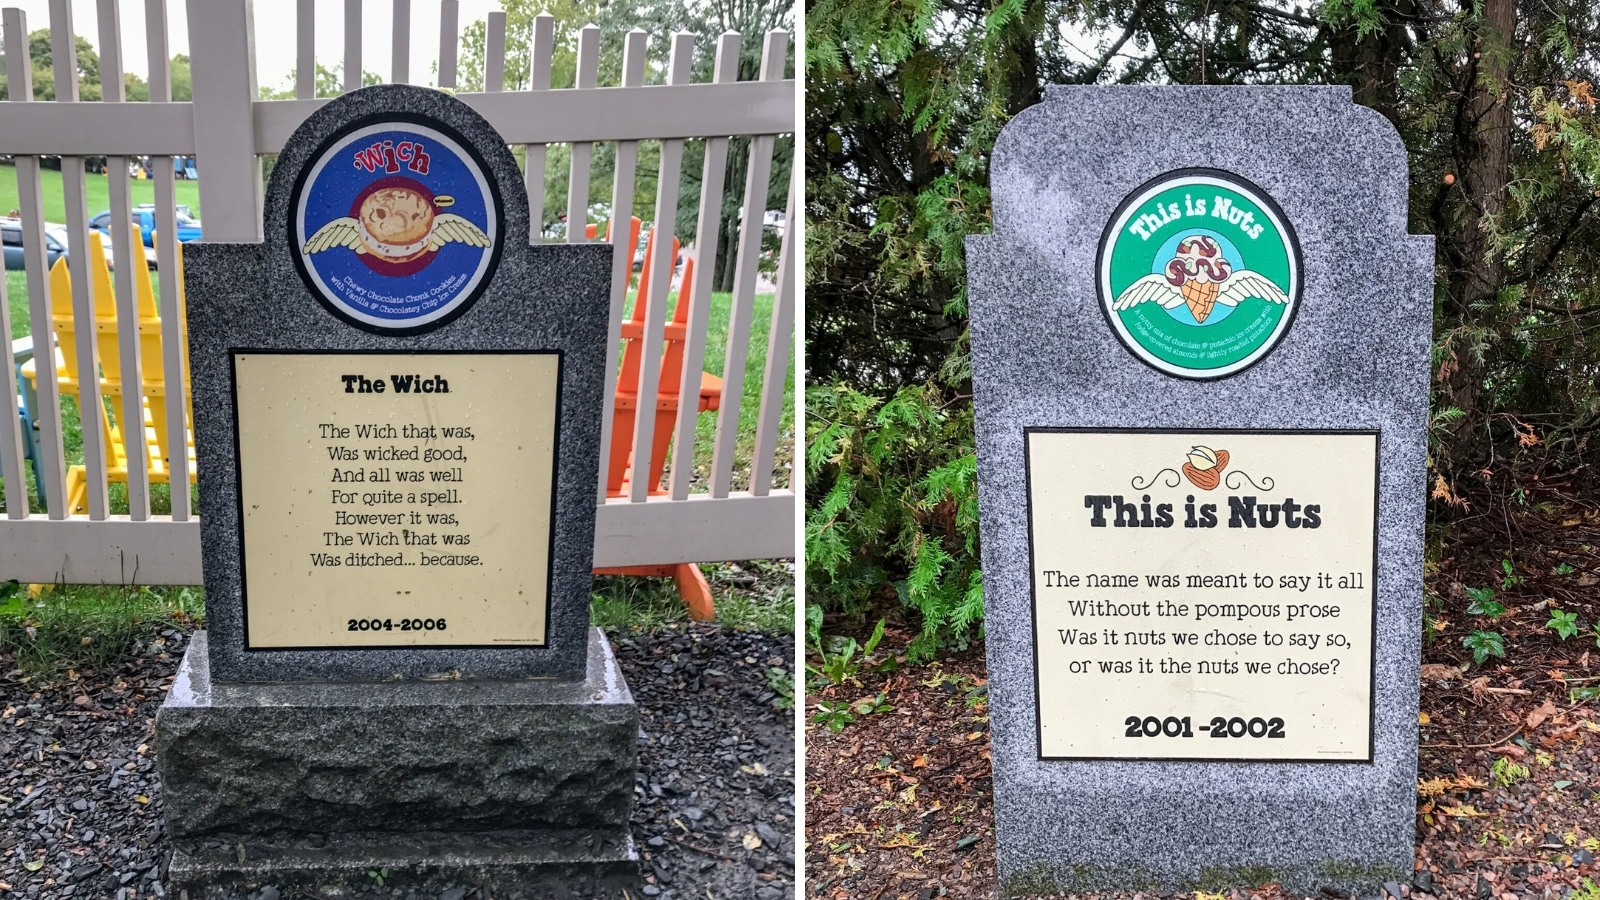 Waterbury-Stowe, Vermont, USA- September 25, 2018: This is Nuts ice cream tombstone at Ben and Jerry’s Flavor Graveyard at the factory and visitor center